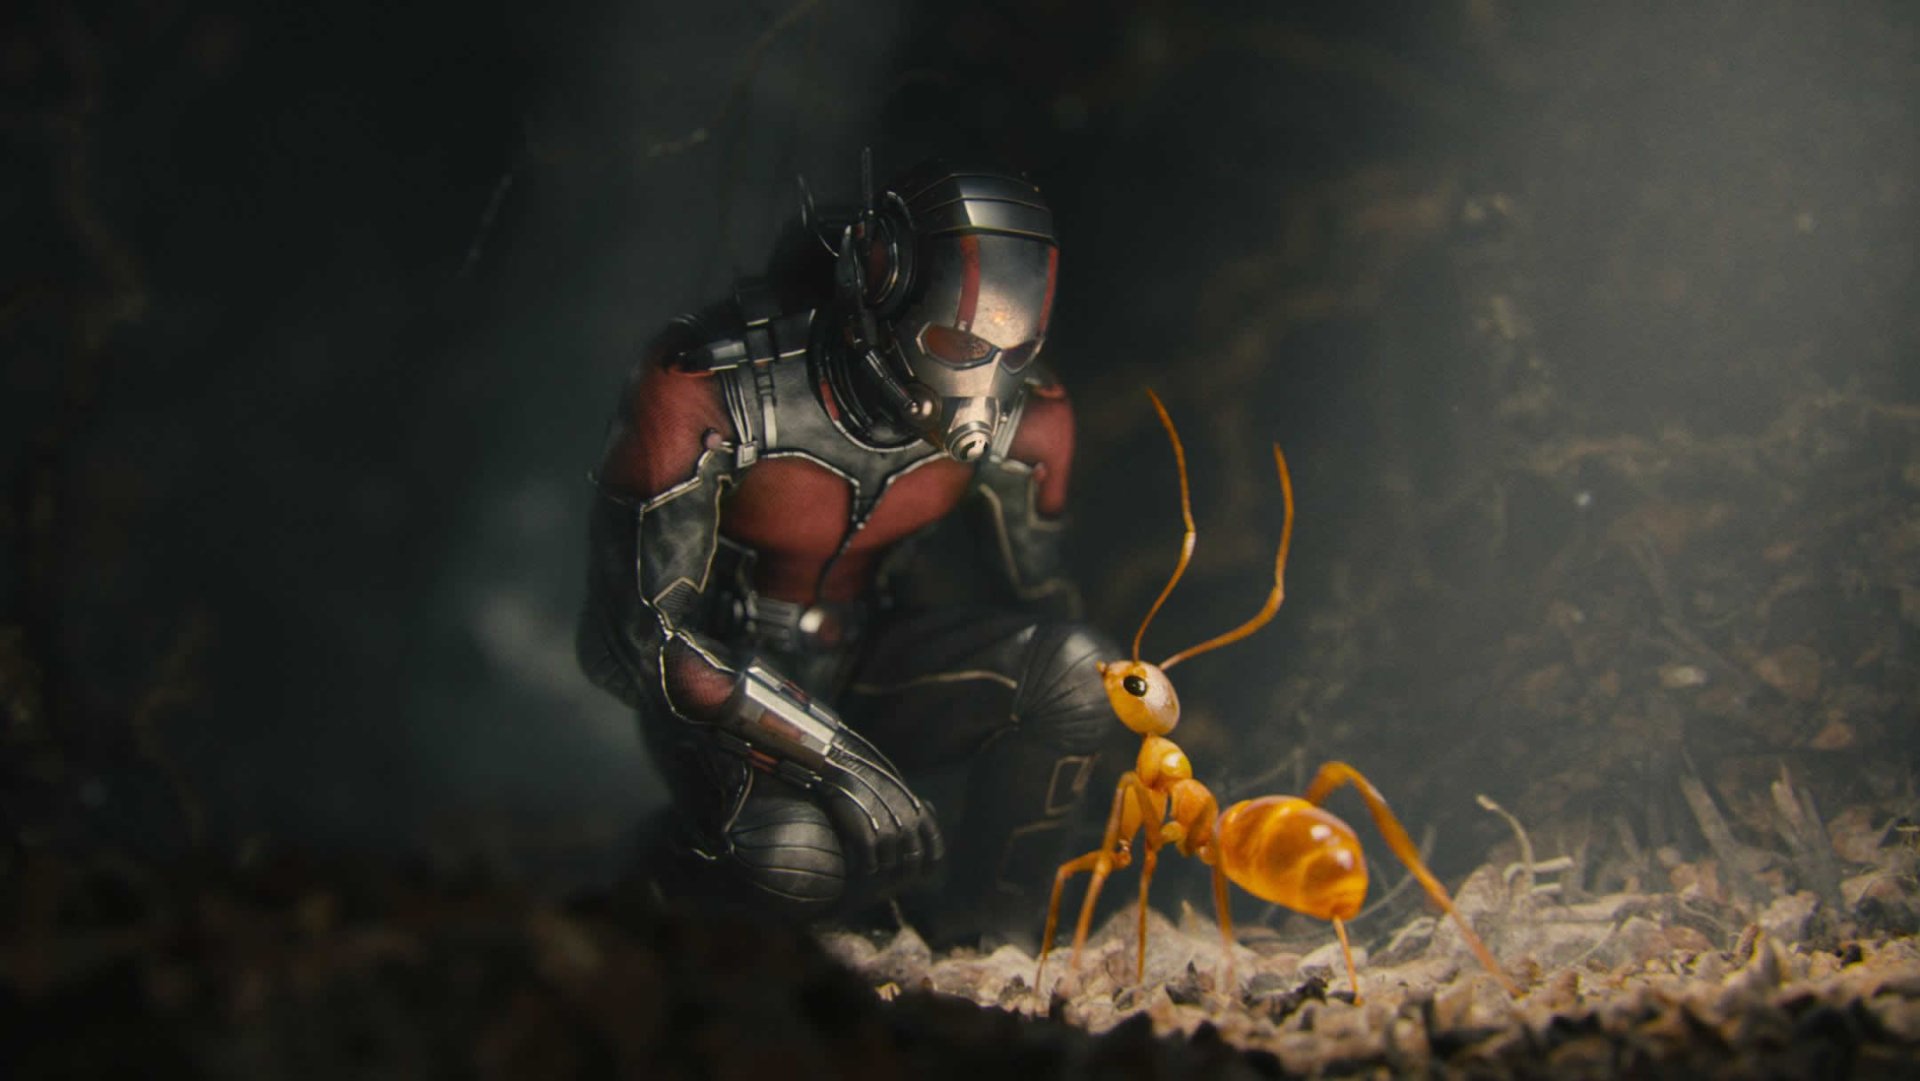 Paul Rudd played the role of Scott Lang in Ant-Man (2015).